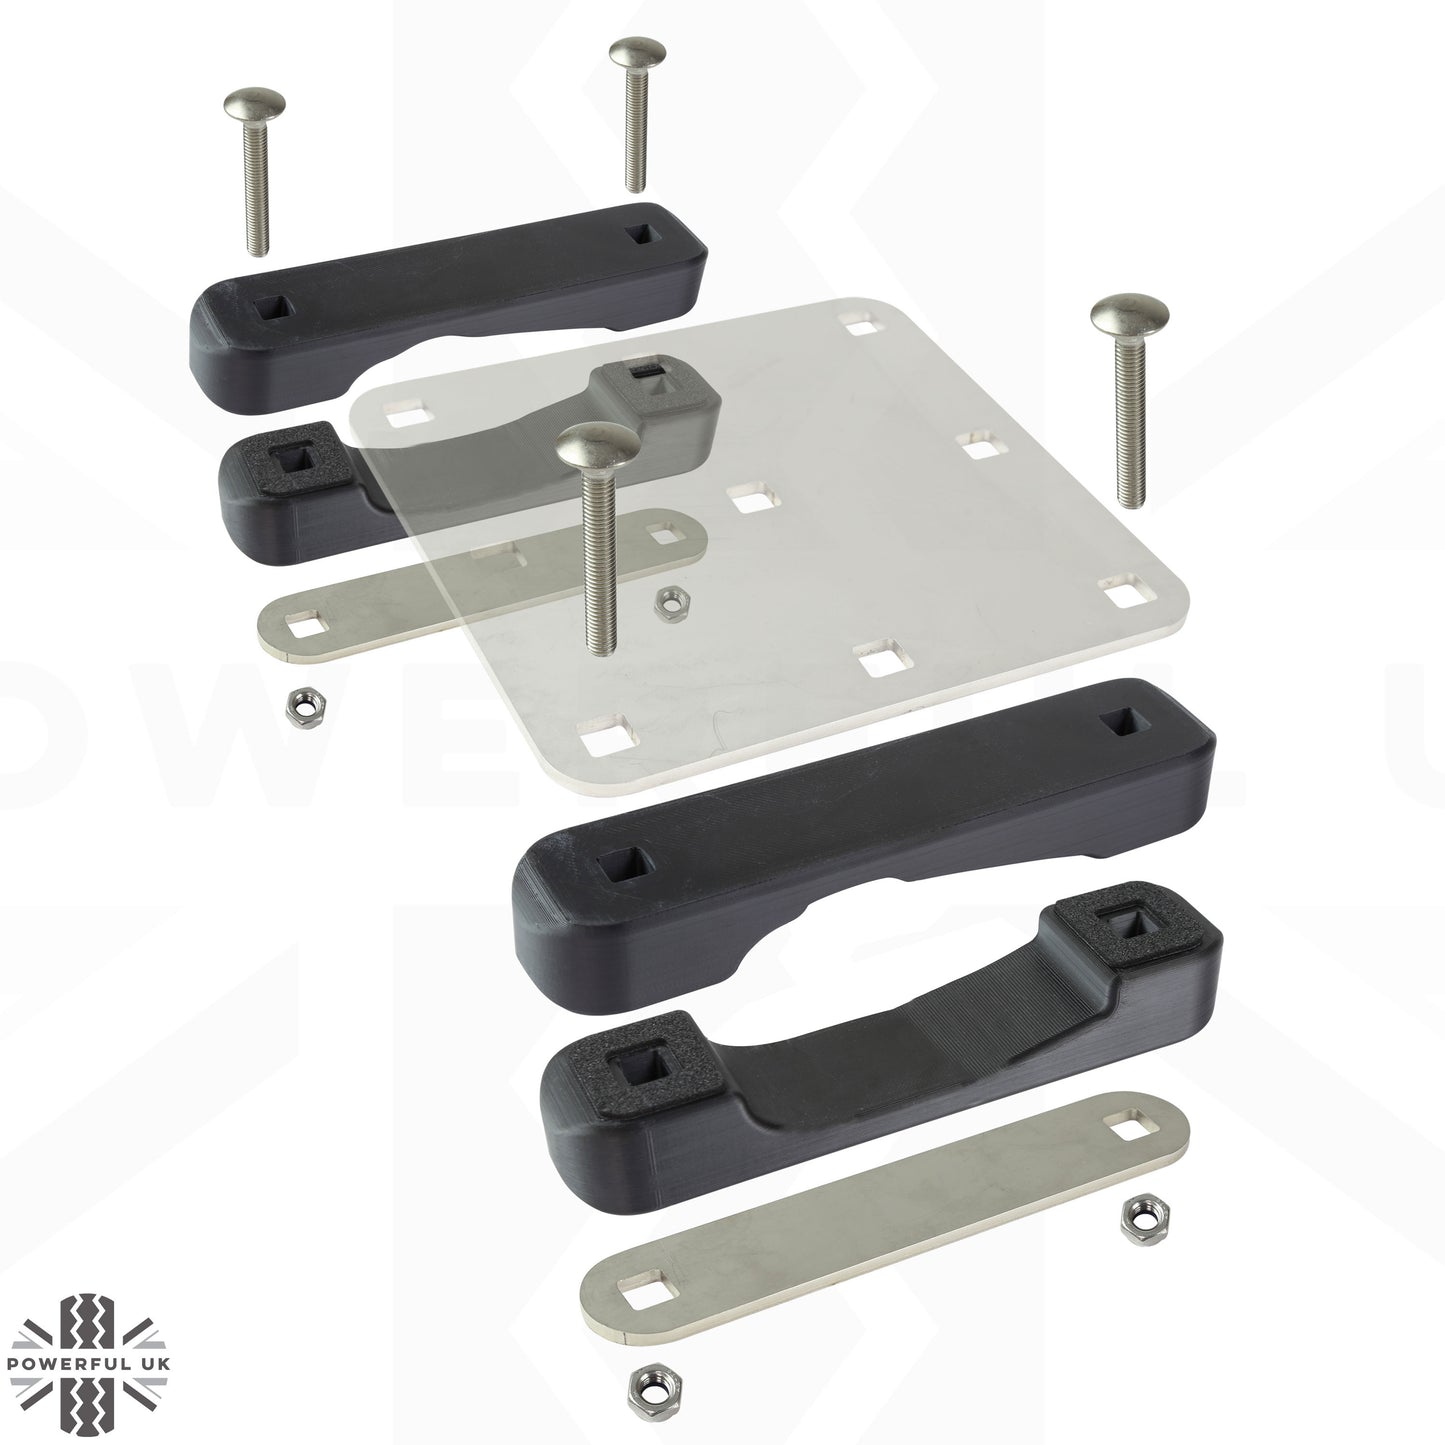 Roof Cross Bar Mount Clamp Kit for the Land Rover Discovery 3&4 - Kit A - Stainless Steel Top